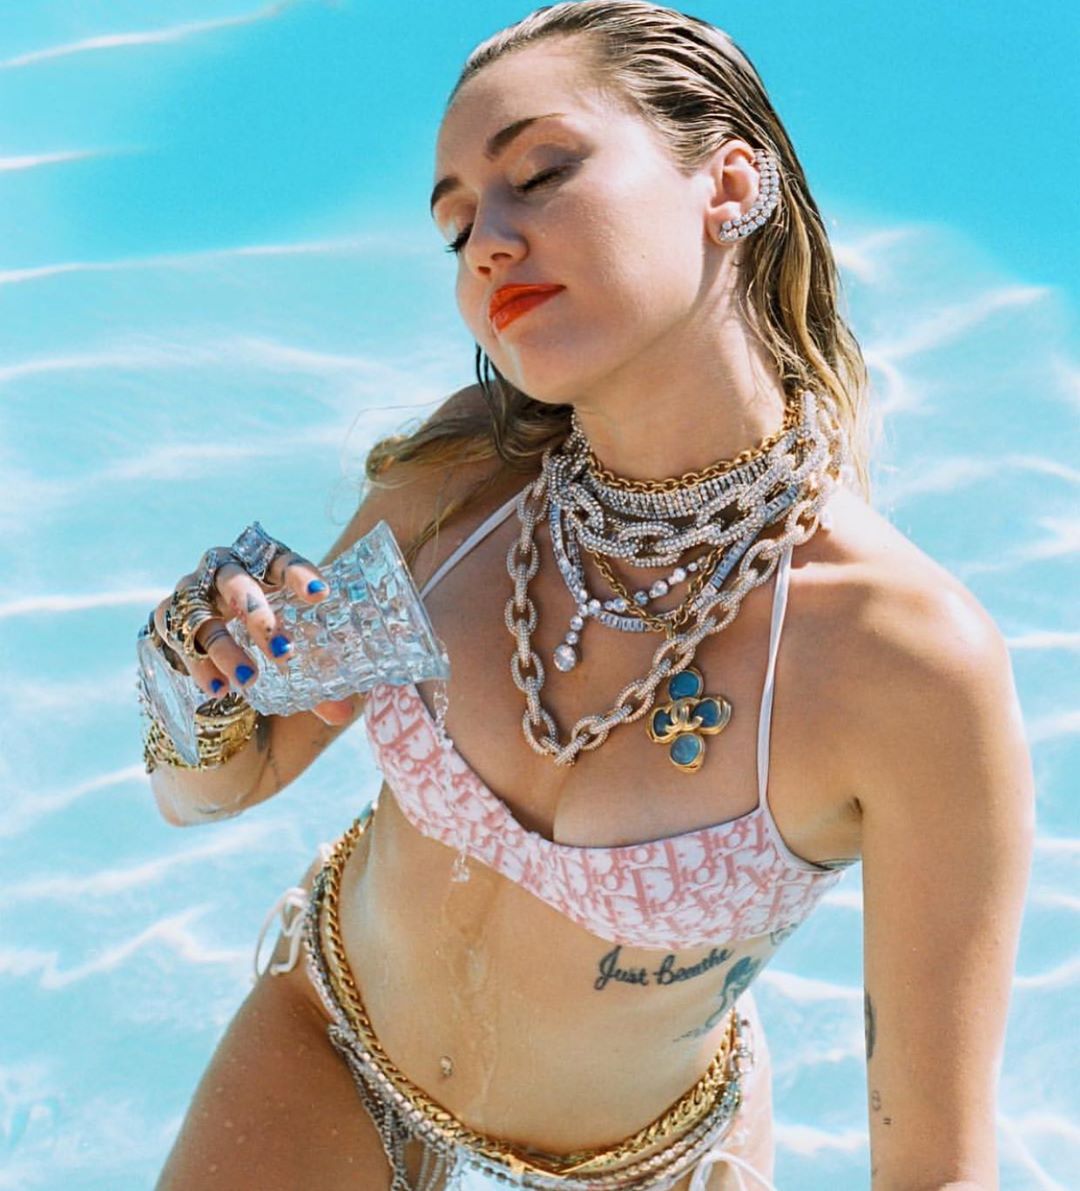 RT @iHeartRadio: Must be something in the water ???? | @MileyCyrus https://t.co/oNUqPsWb0A